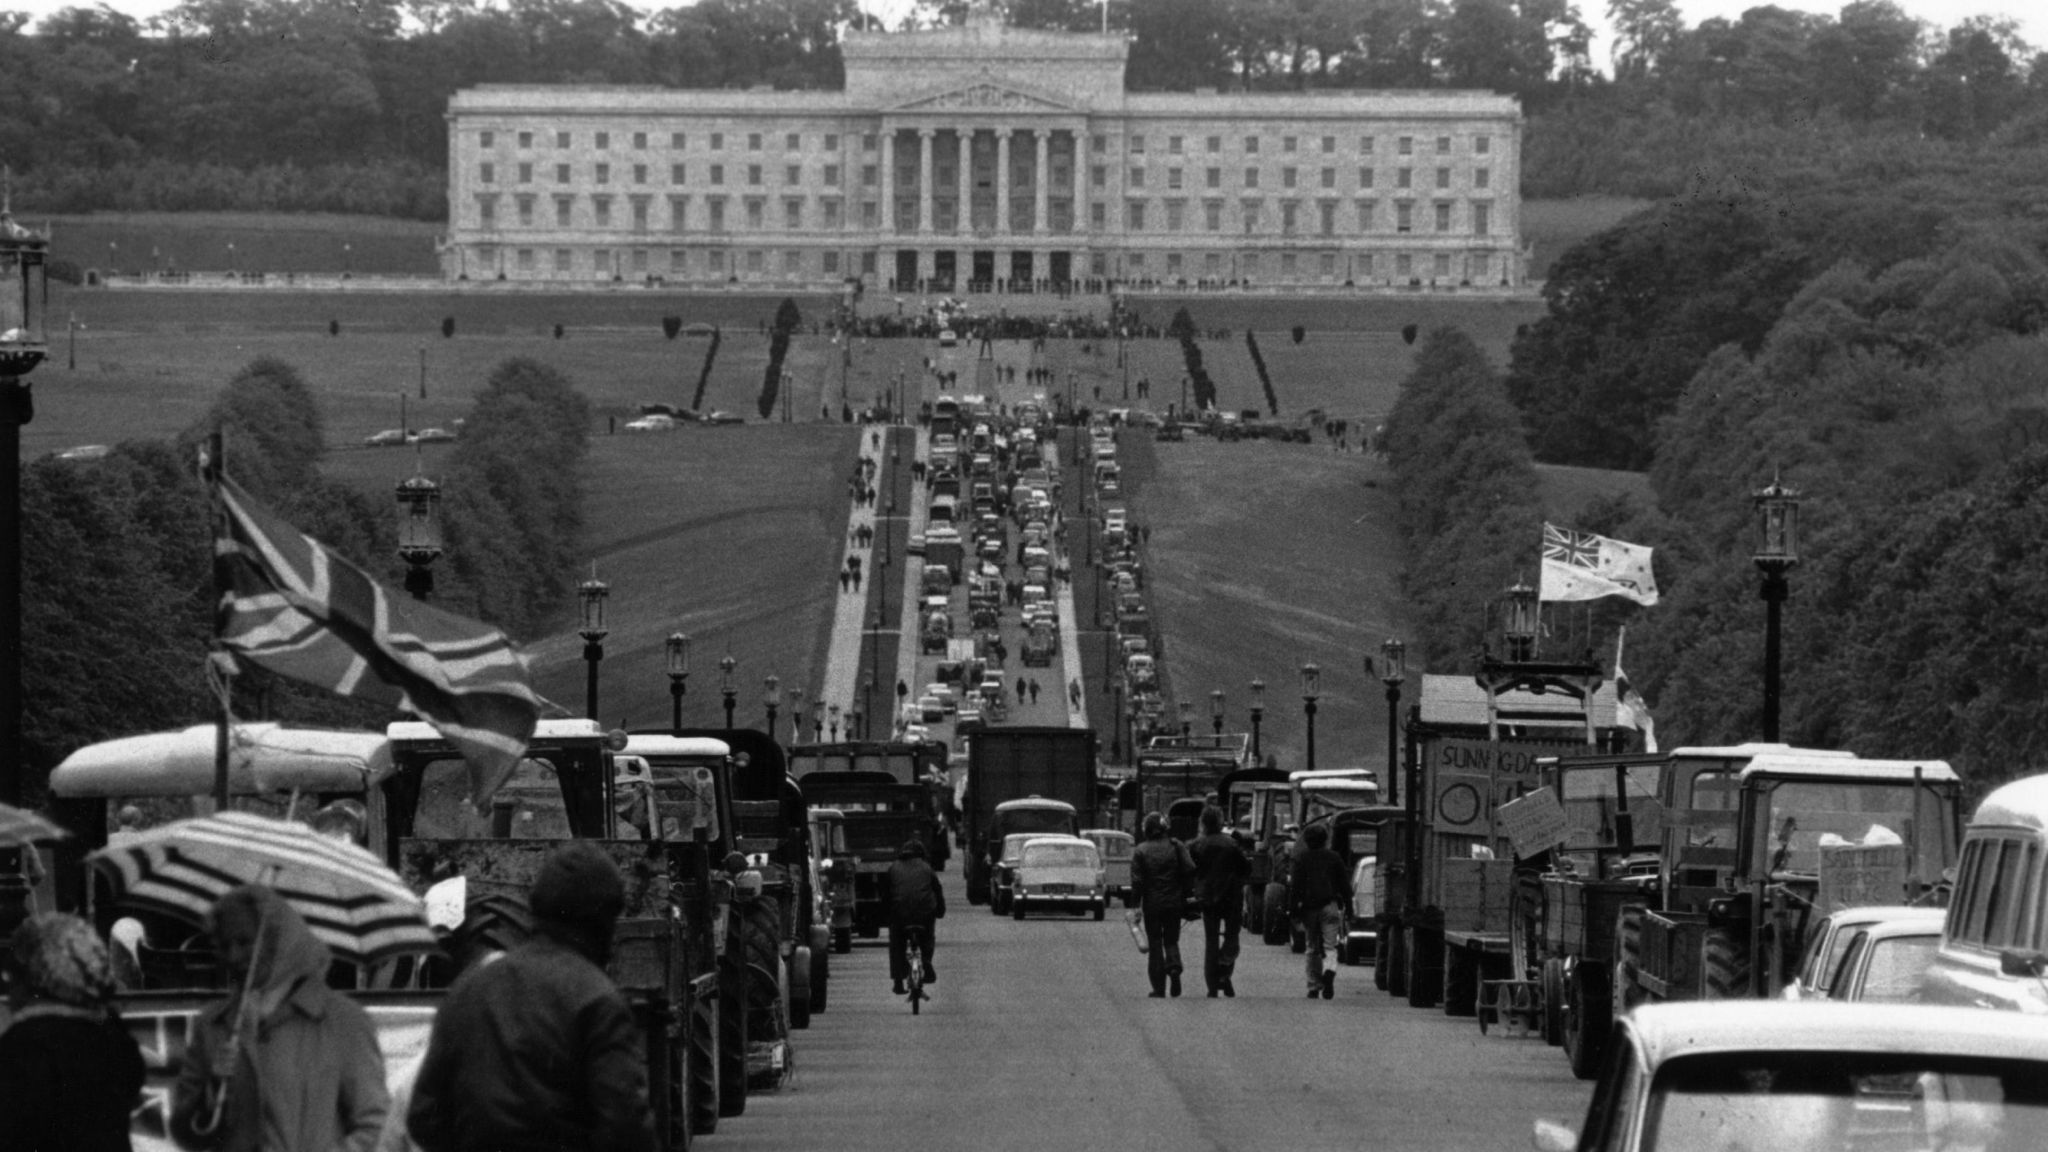 A unionist demonstration at Stormont following the Ulster Workers' Council Strike